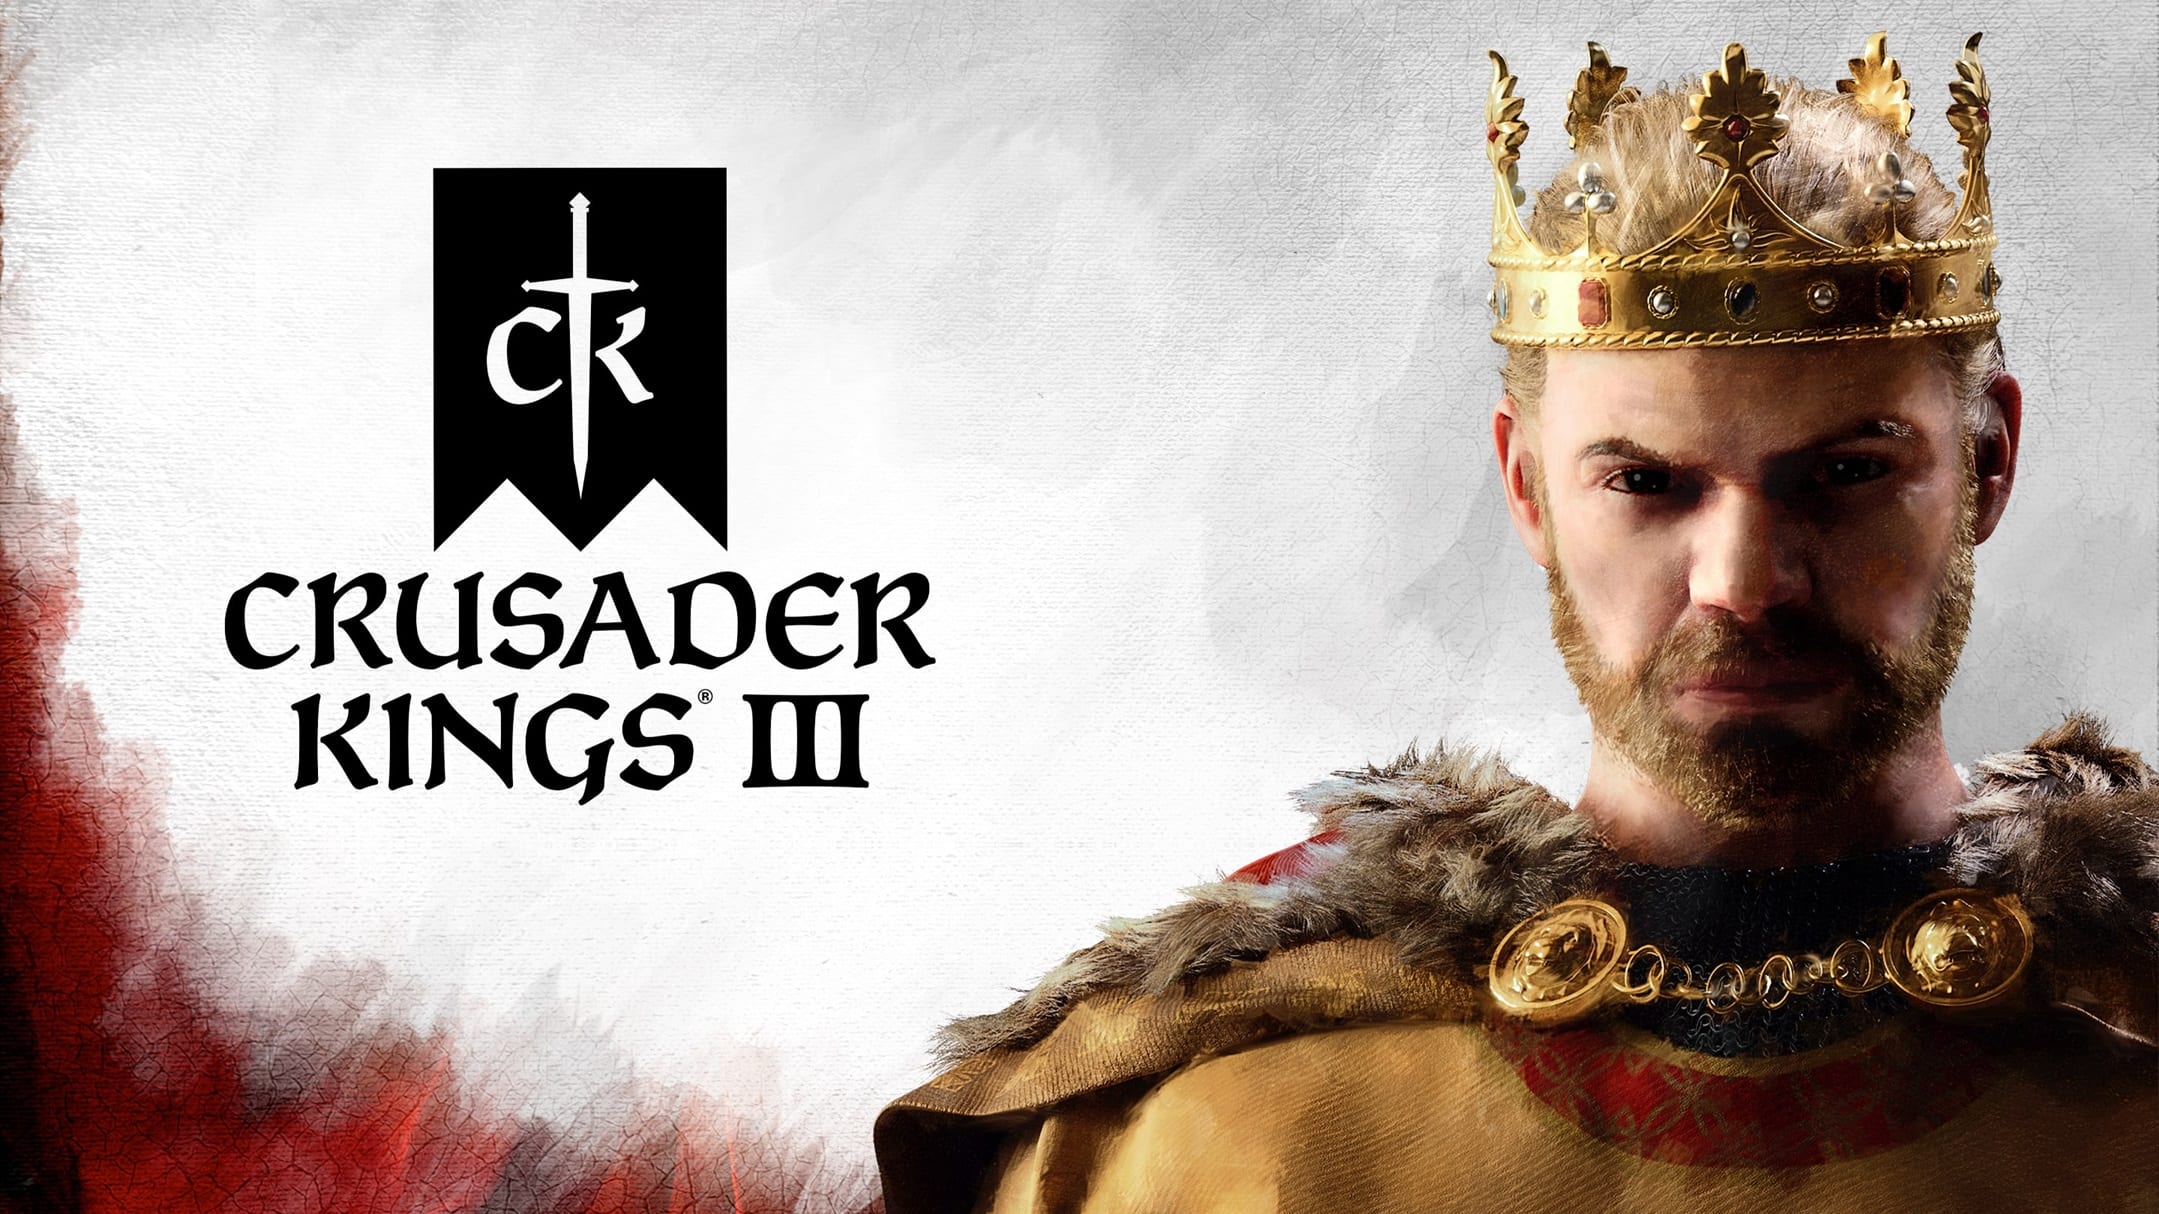 Crusader Kings 3 key art showing a monarch on a white background with bloodstains in the corner.